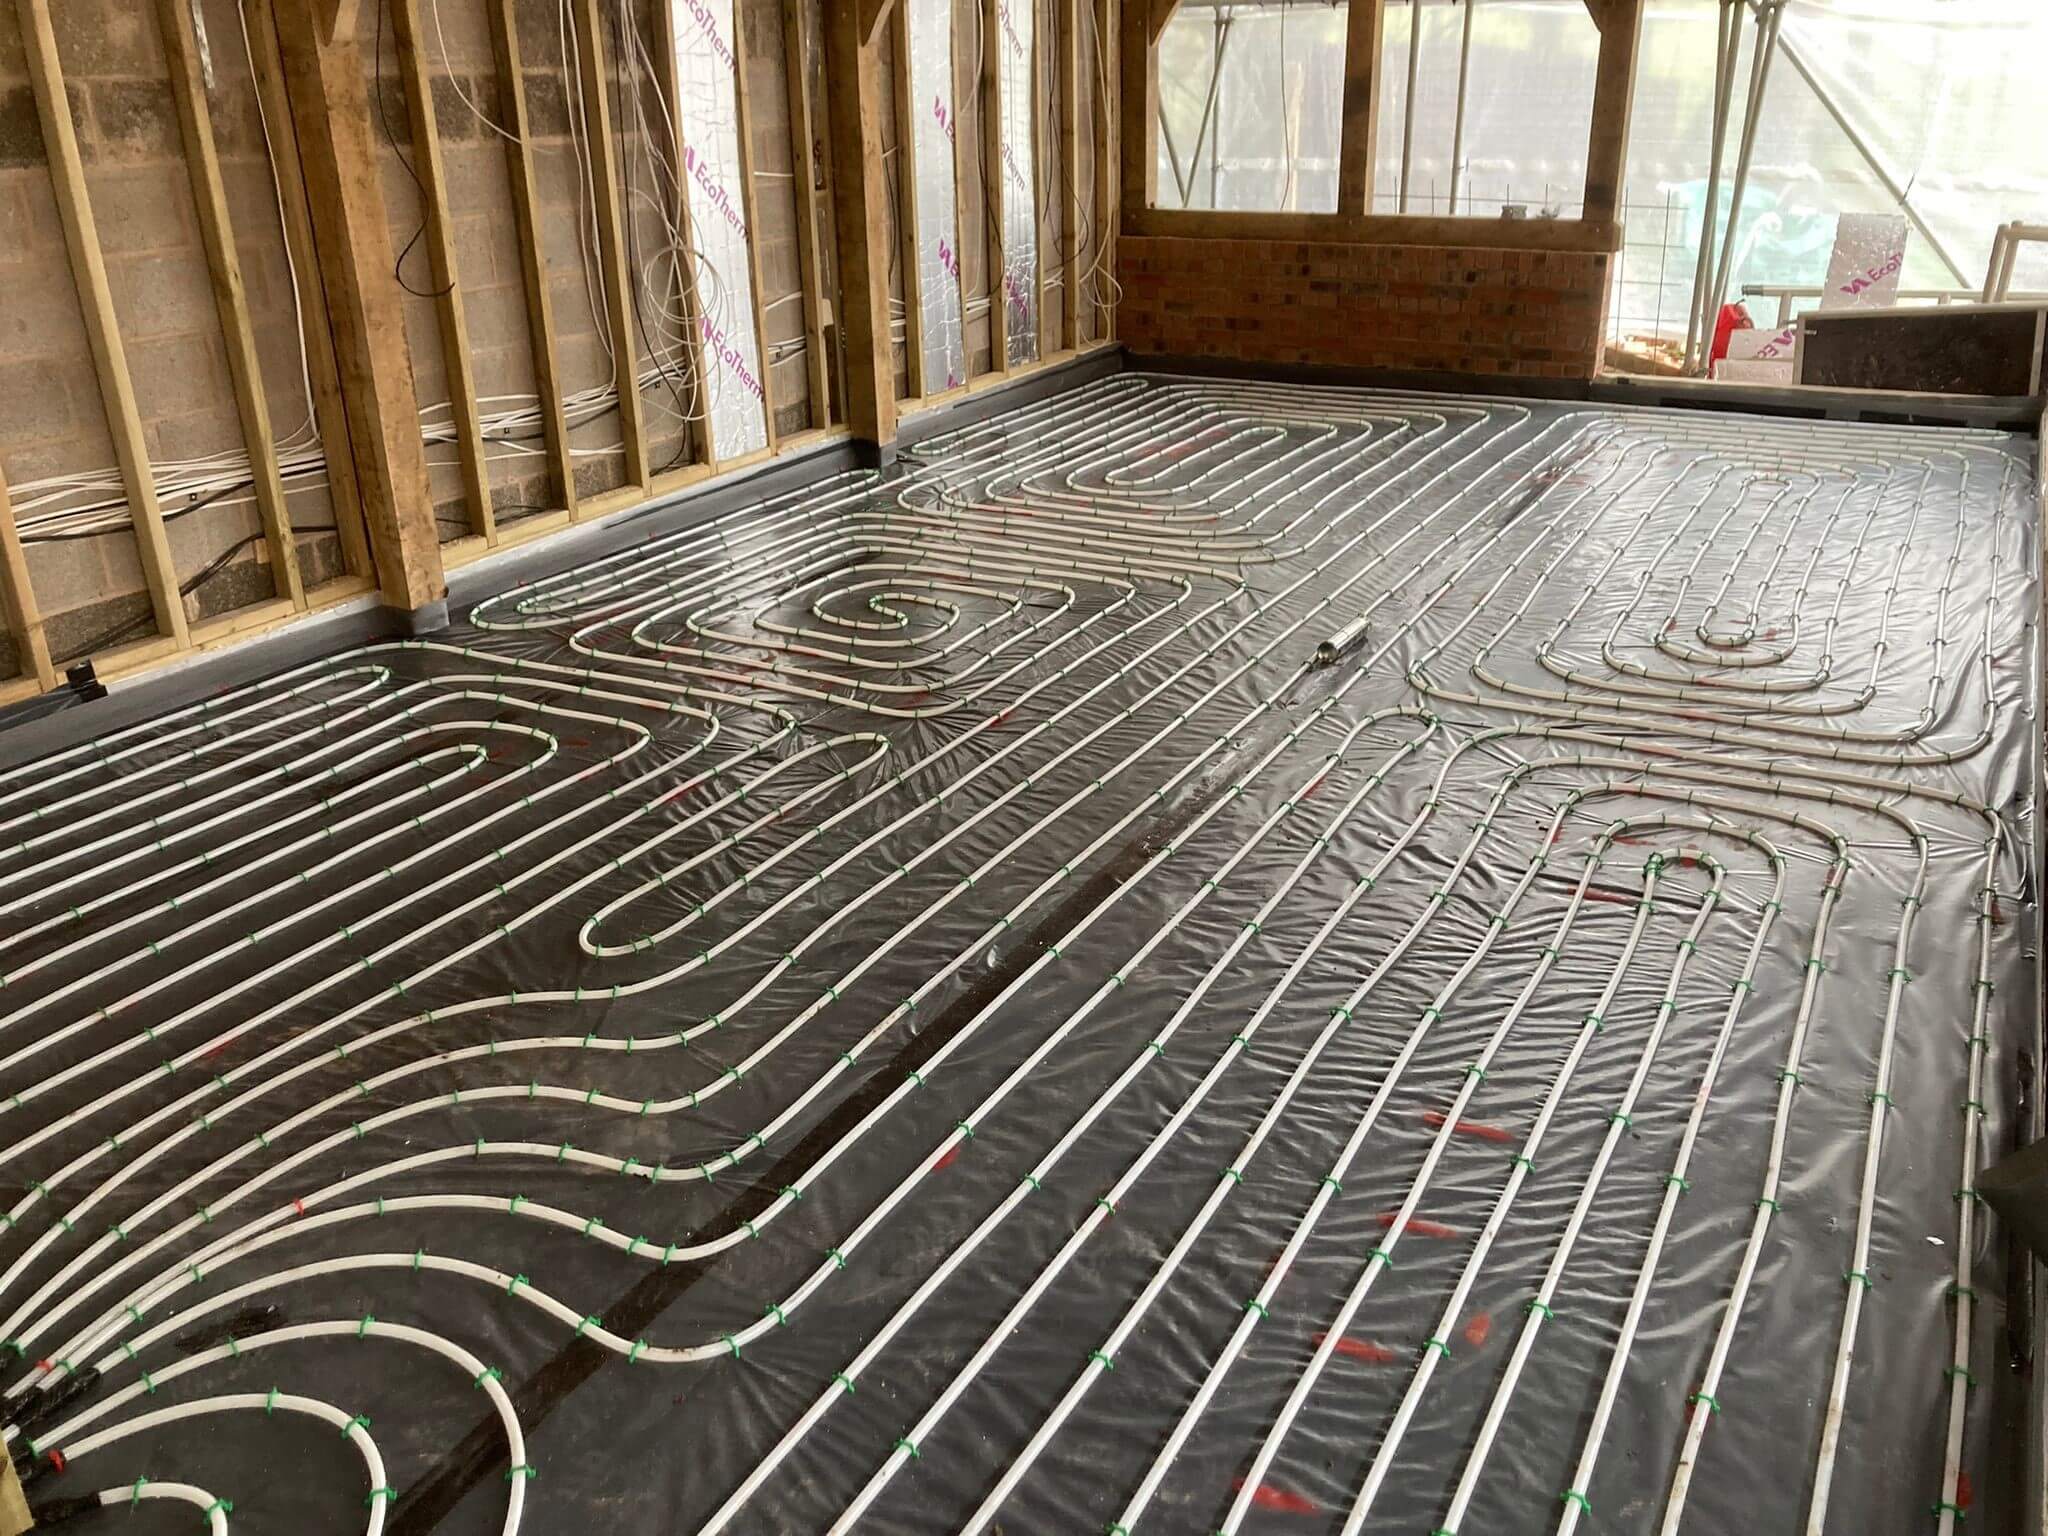 Underfloor heating installation at a commerical property